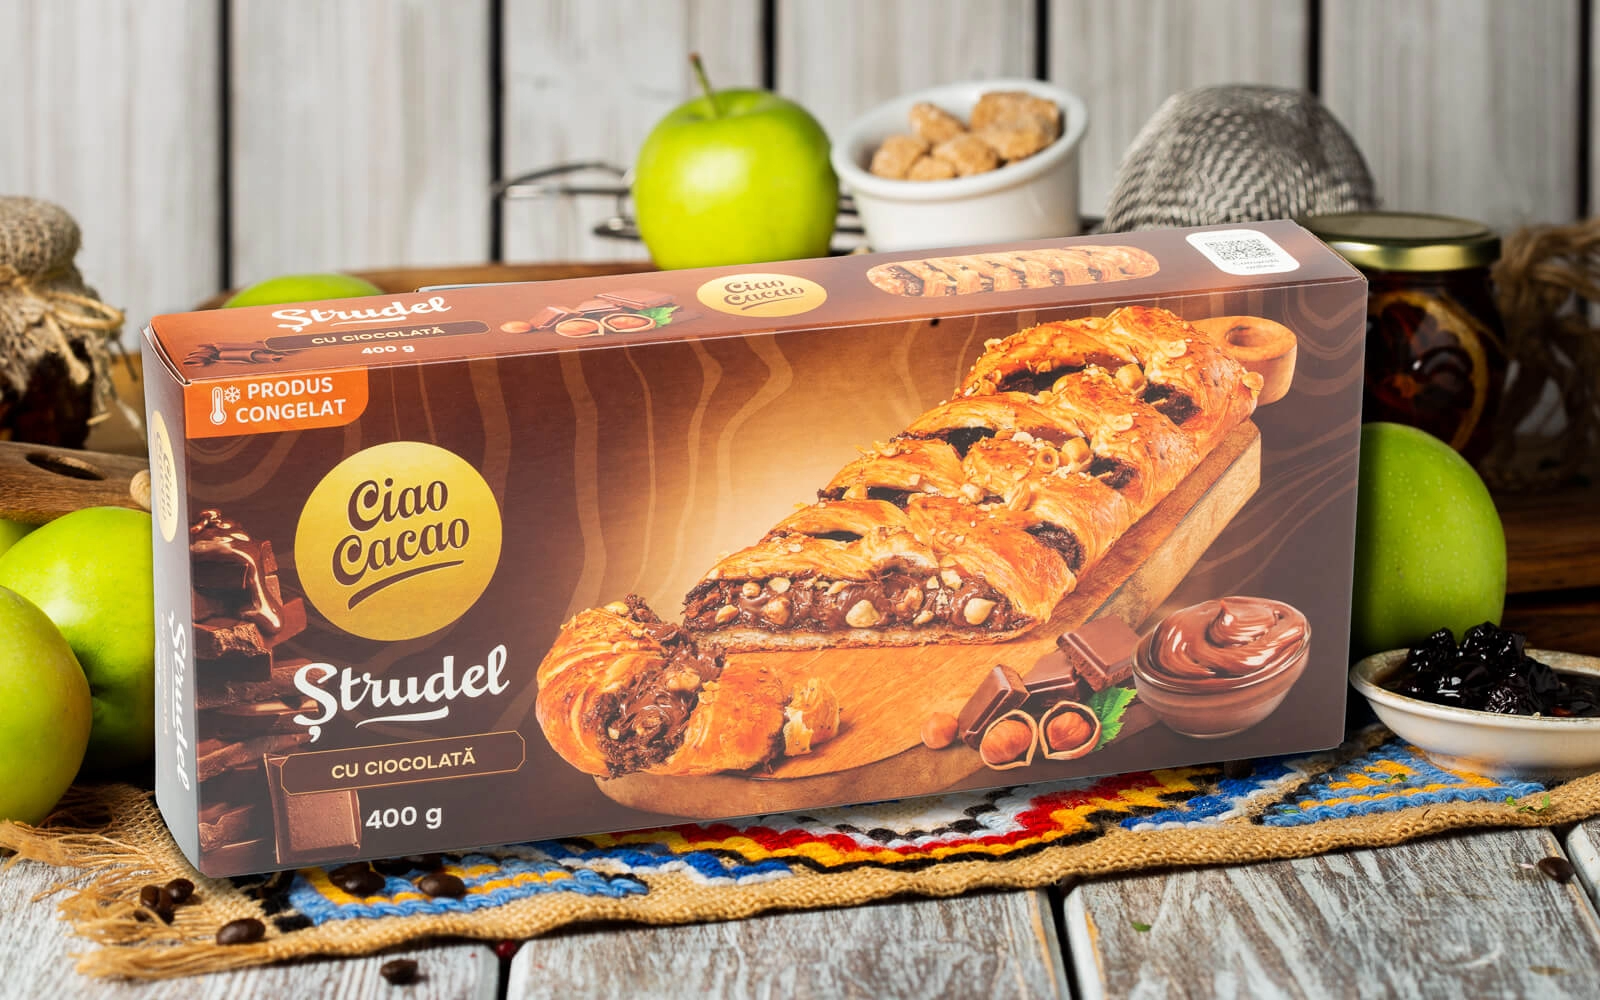 Frozen product. Strudel with chocolate cream